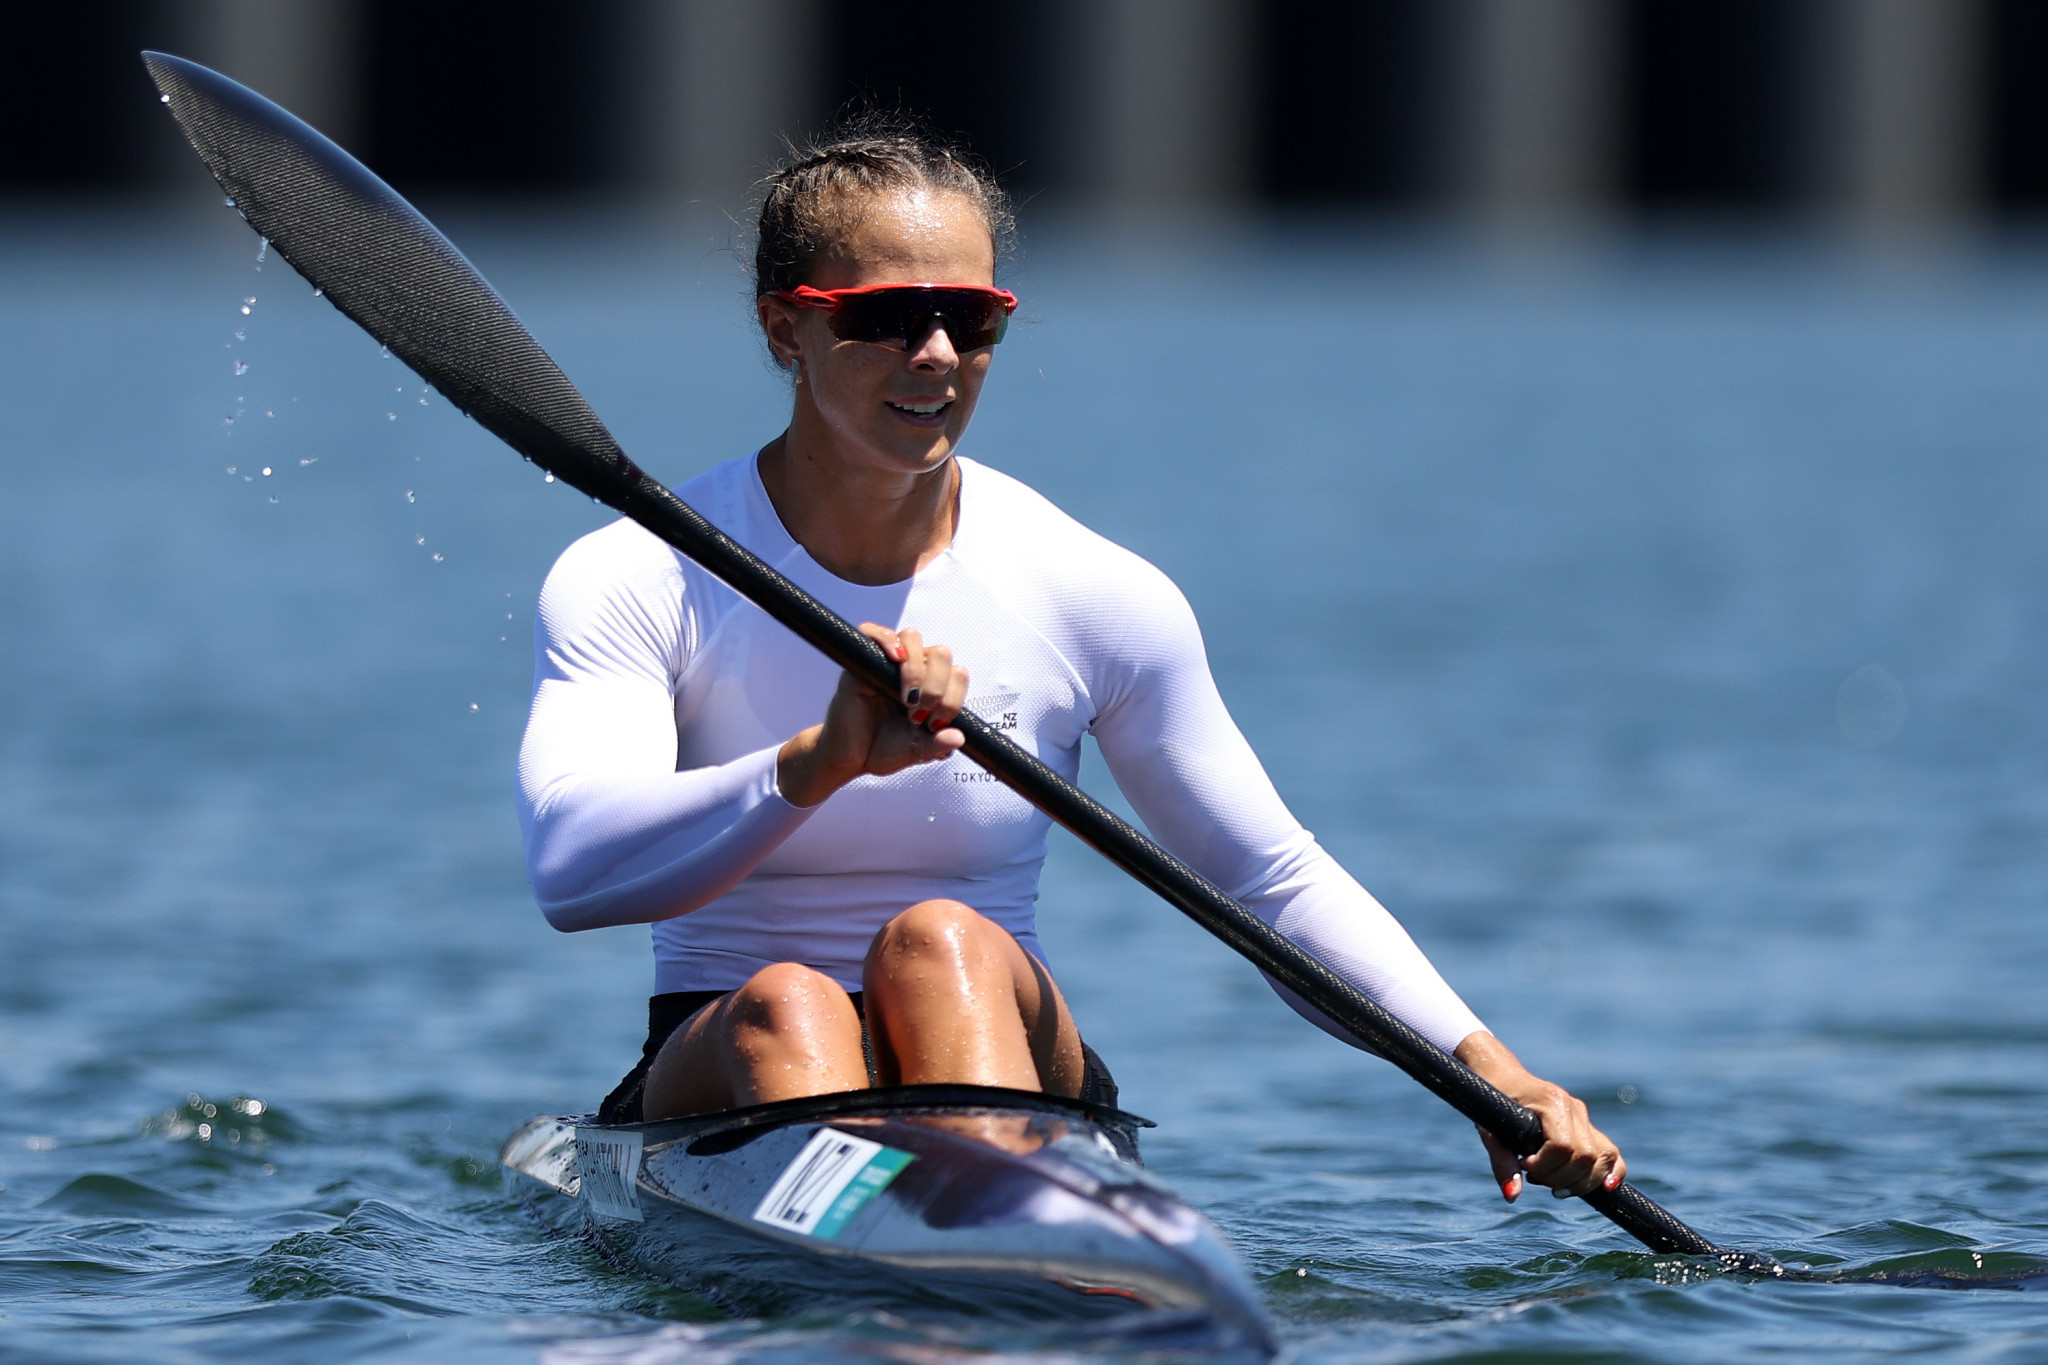 Olympic champions dominate at ICF Canoe Sprint World Cup in Račice